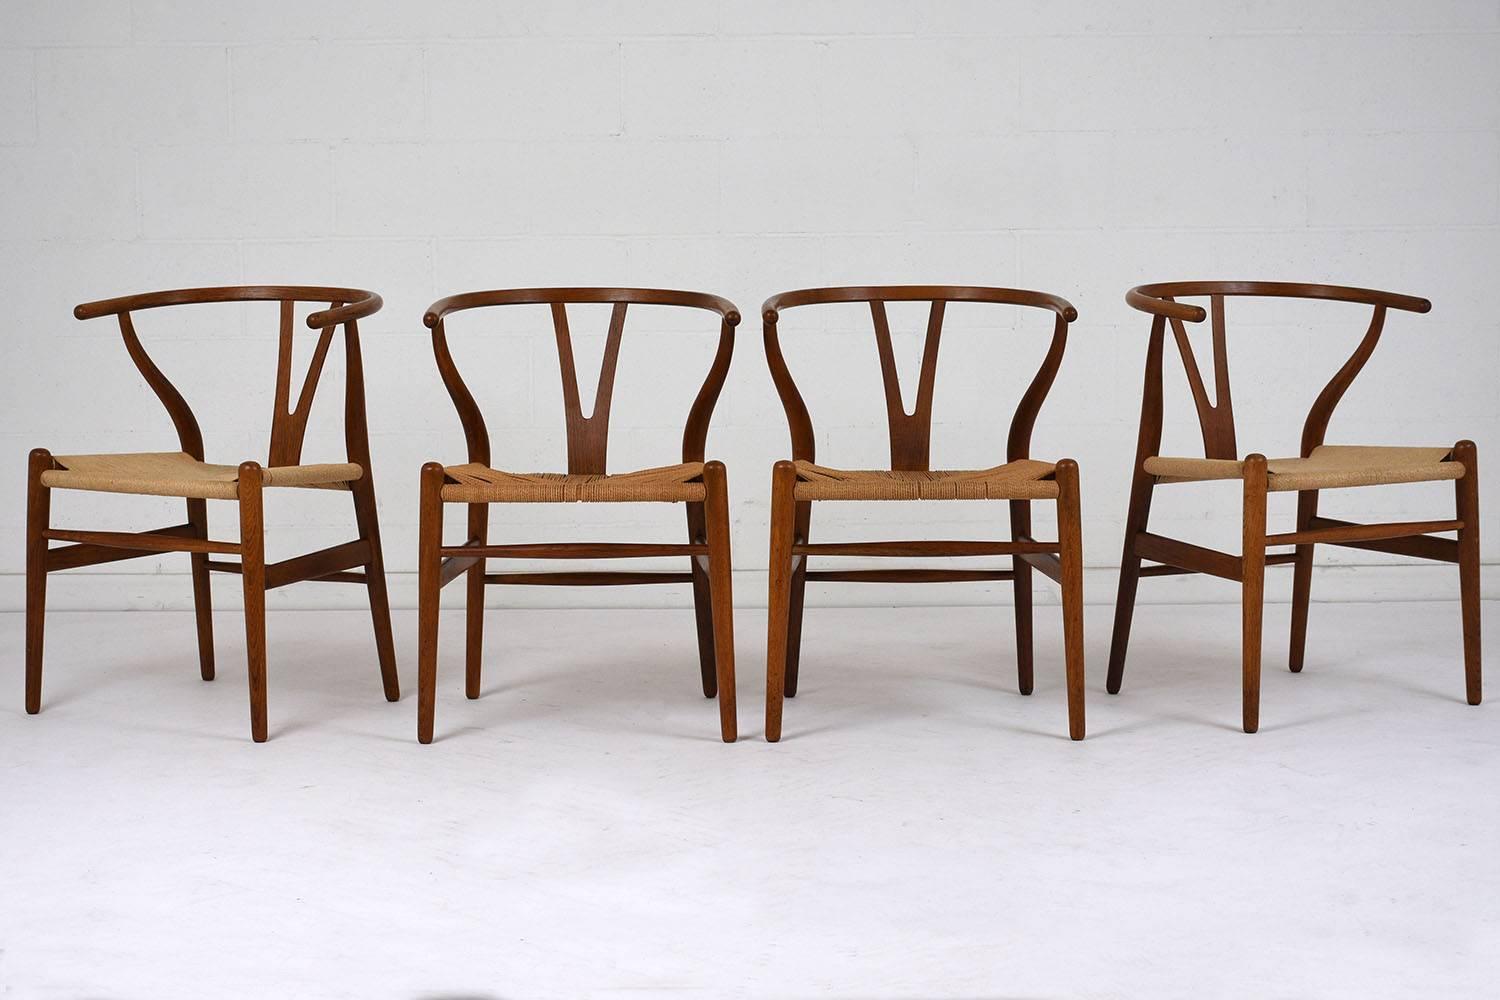 This set of four 1970s Mid-Century Modern-style dining chairs feature teak wood frames stained in a light walnut color and a polished finish. The horseshoe backs have a V-shaped splat and serpentine arms. The round tapered legs have stretched bars